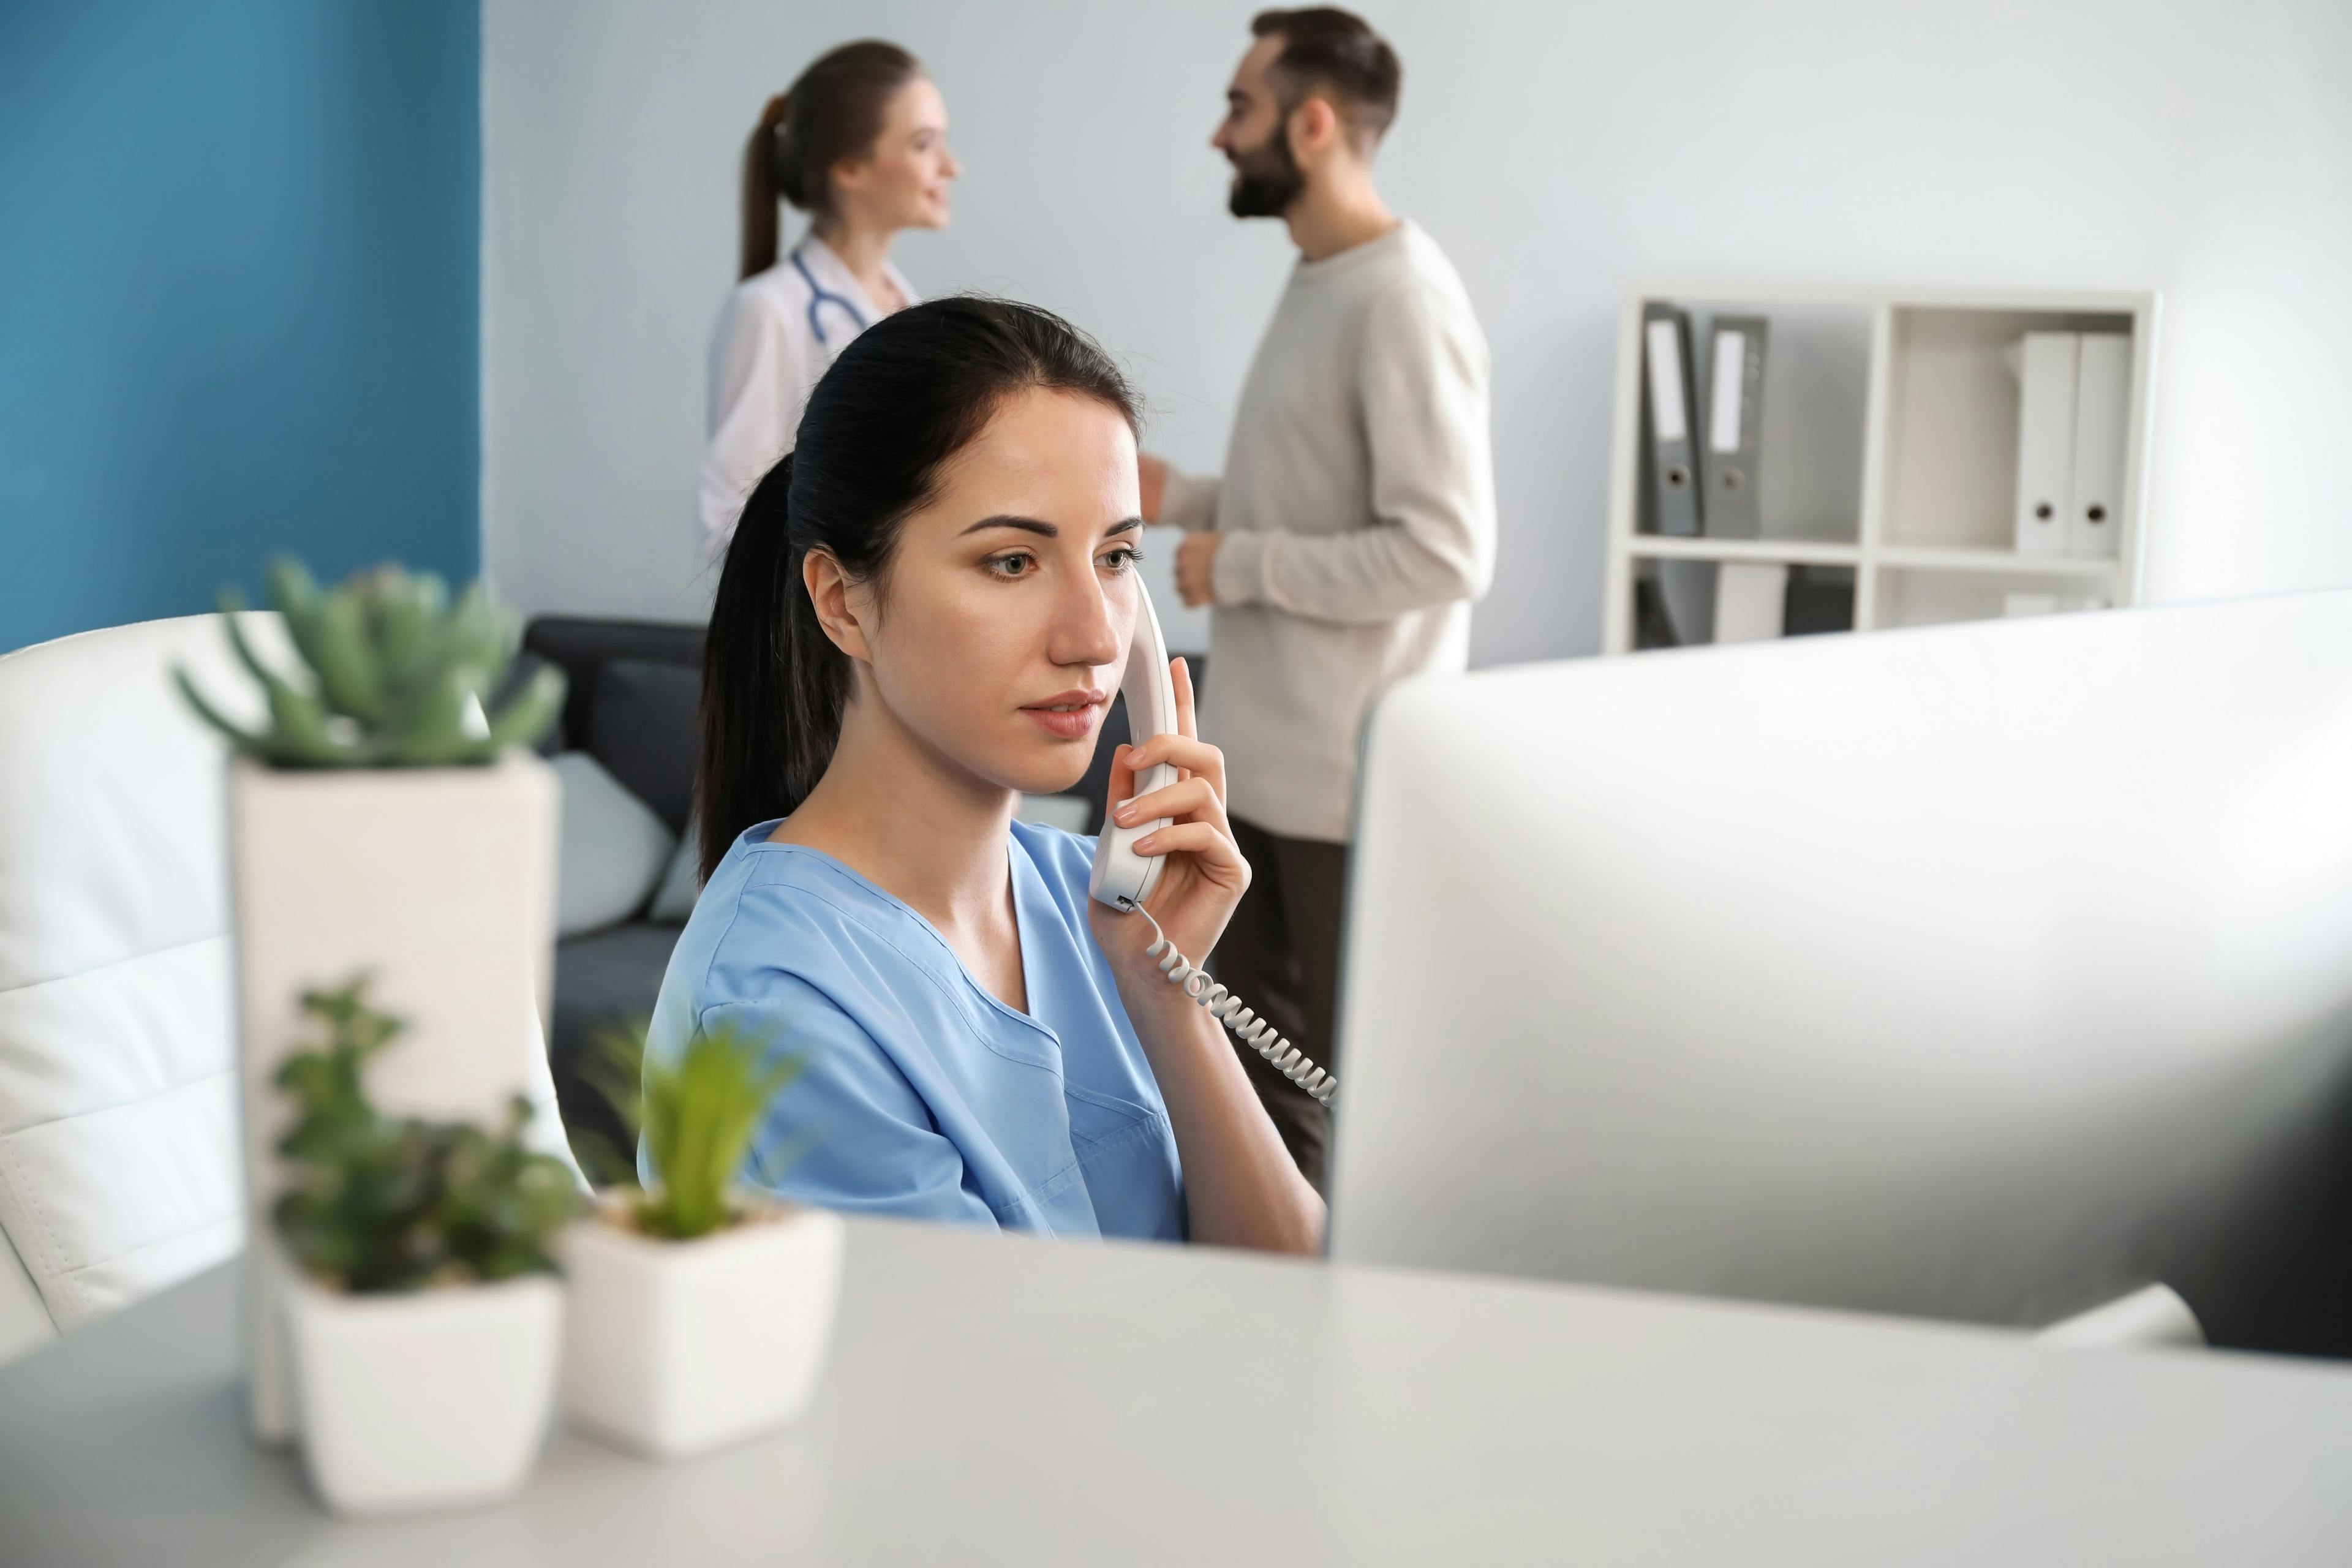 medical staffer on phone in medical office